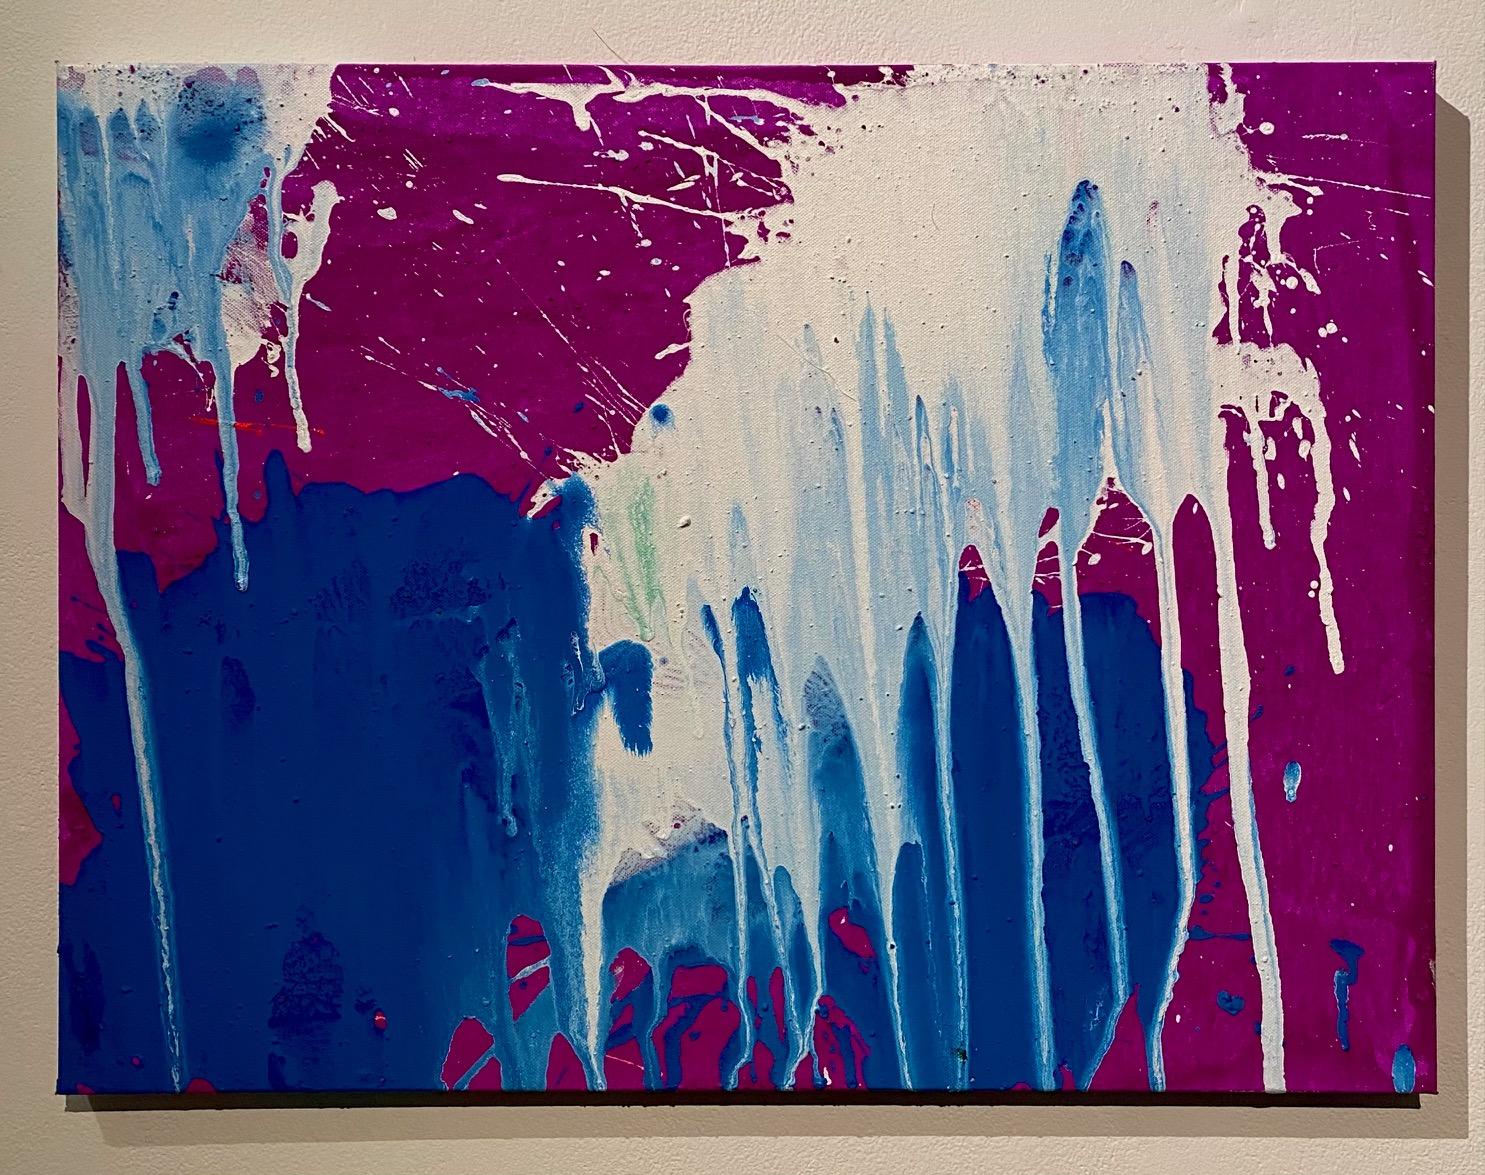 Ushio Shinohara Abstract Painting - "White and Blue on Violet, " Acrylic on Canvas - Abstract Boxing painting